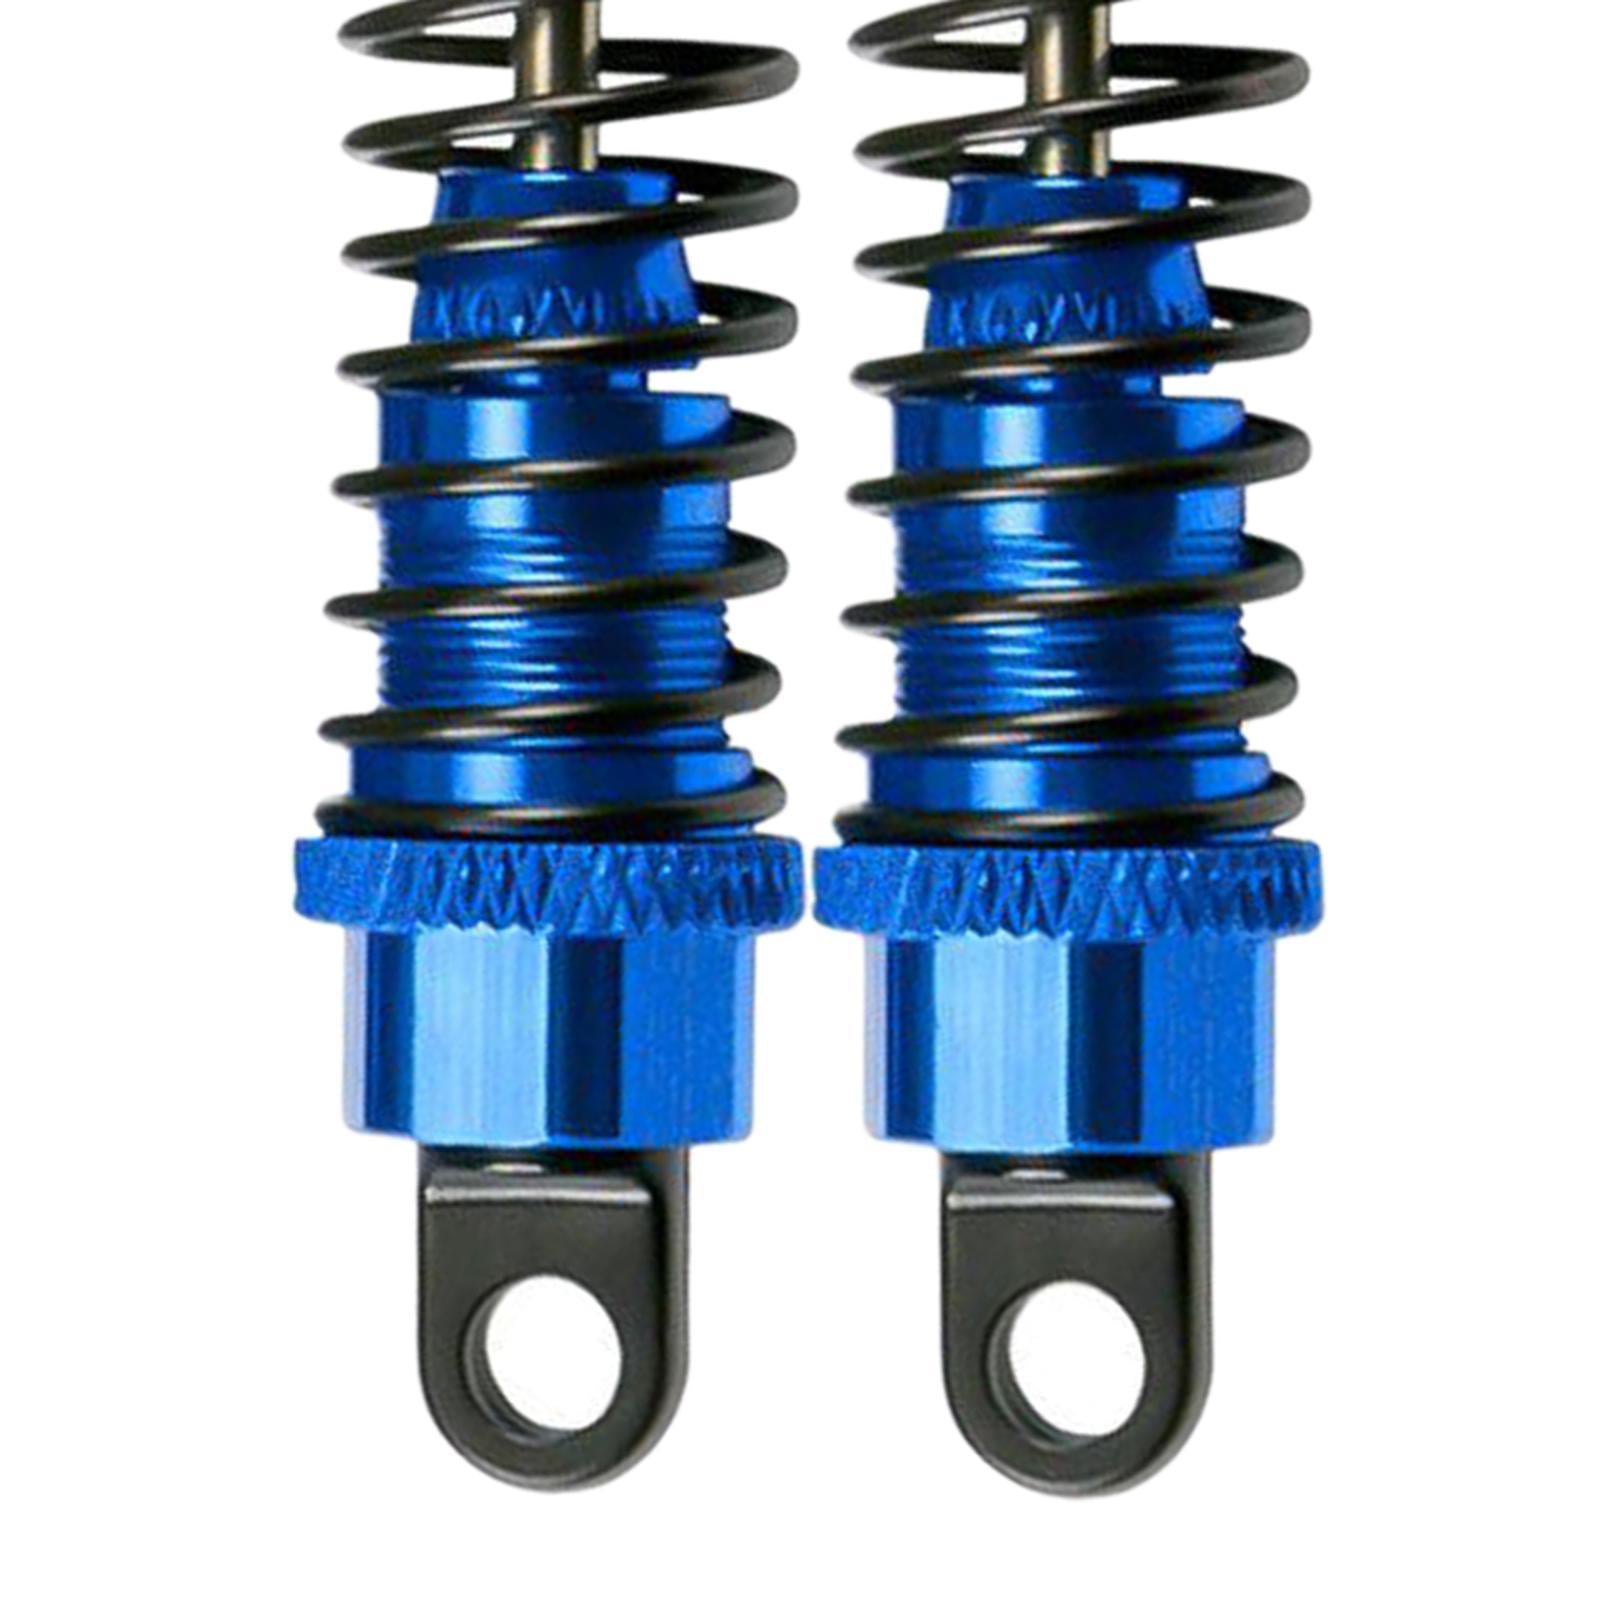 Details about   2x 1/18 Shock Absorber Damper for WLtoys A949 A959 A969 A979 K929 RC Crawler